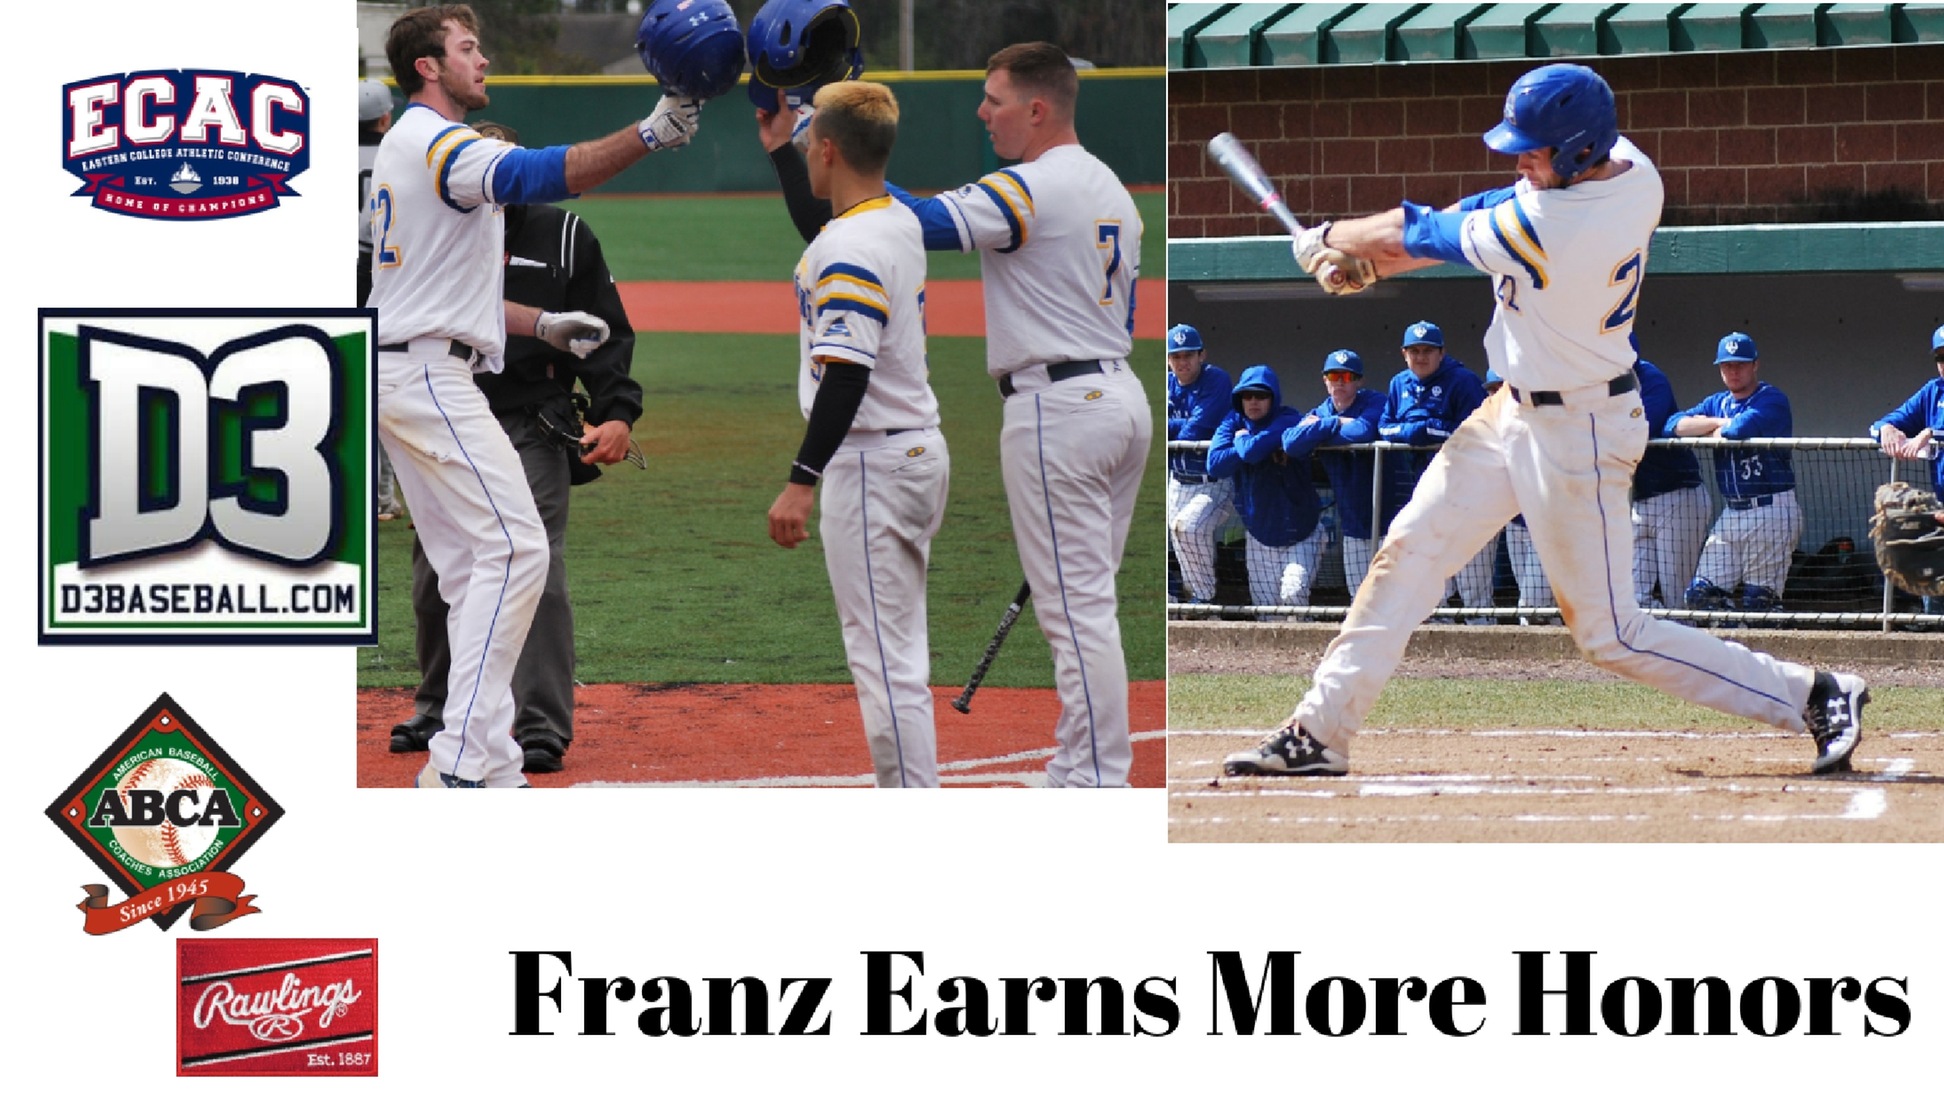 Franz Earns More Honors